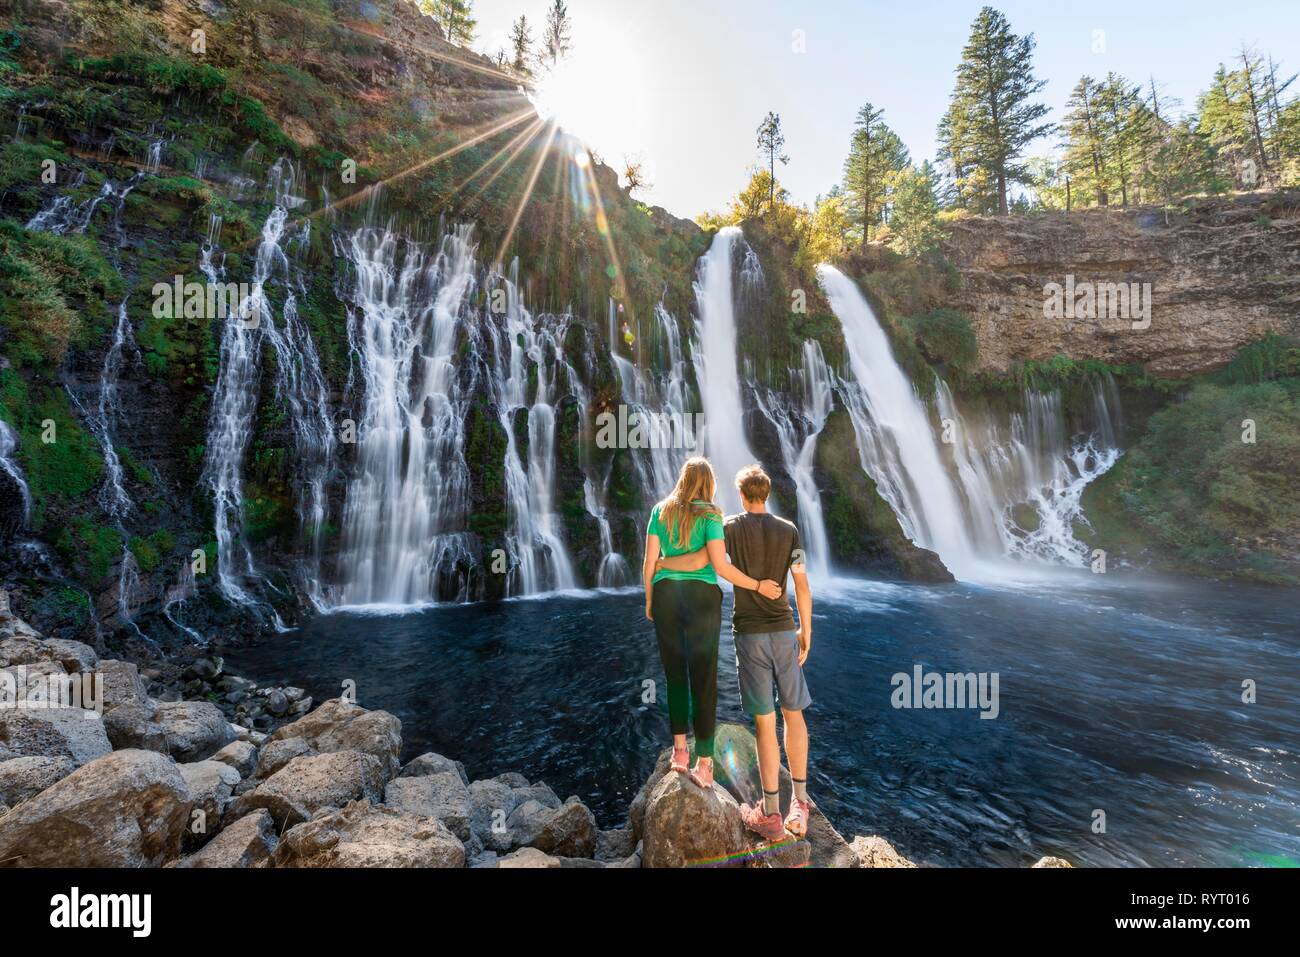 Young couple standing at a waterfall, McArthur-Burney Falls Memorial State Park, California, USA Stock Photo